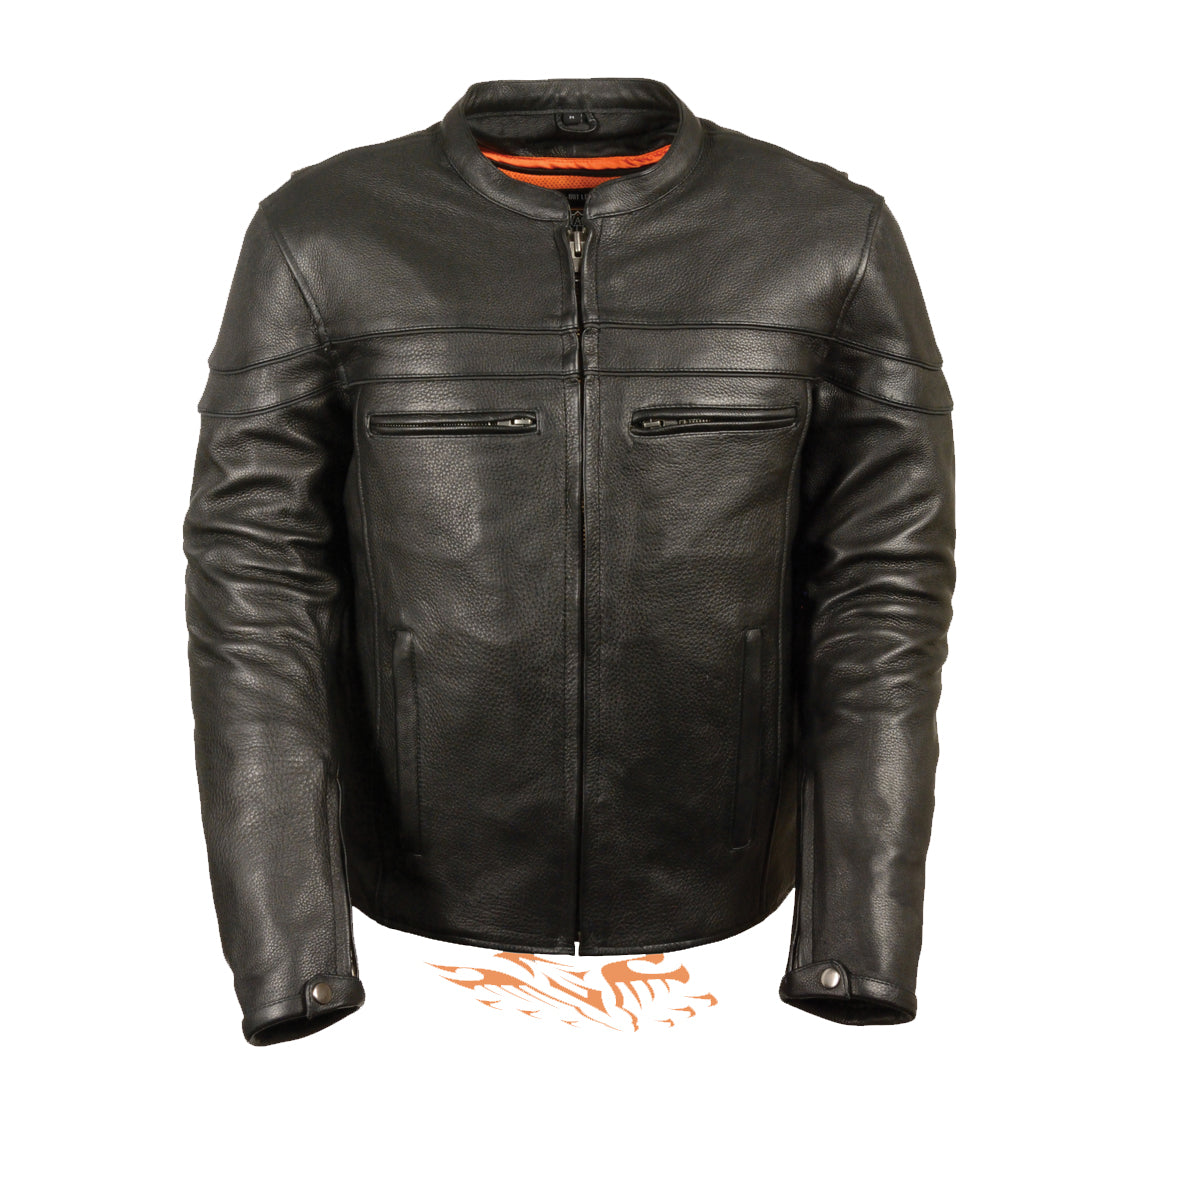 MEN'S SPORTY SCOOTER CROSSOVER JACKET